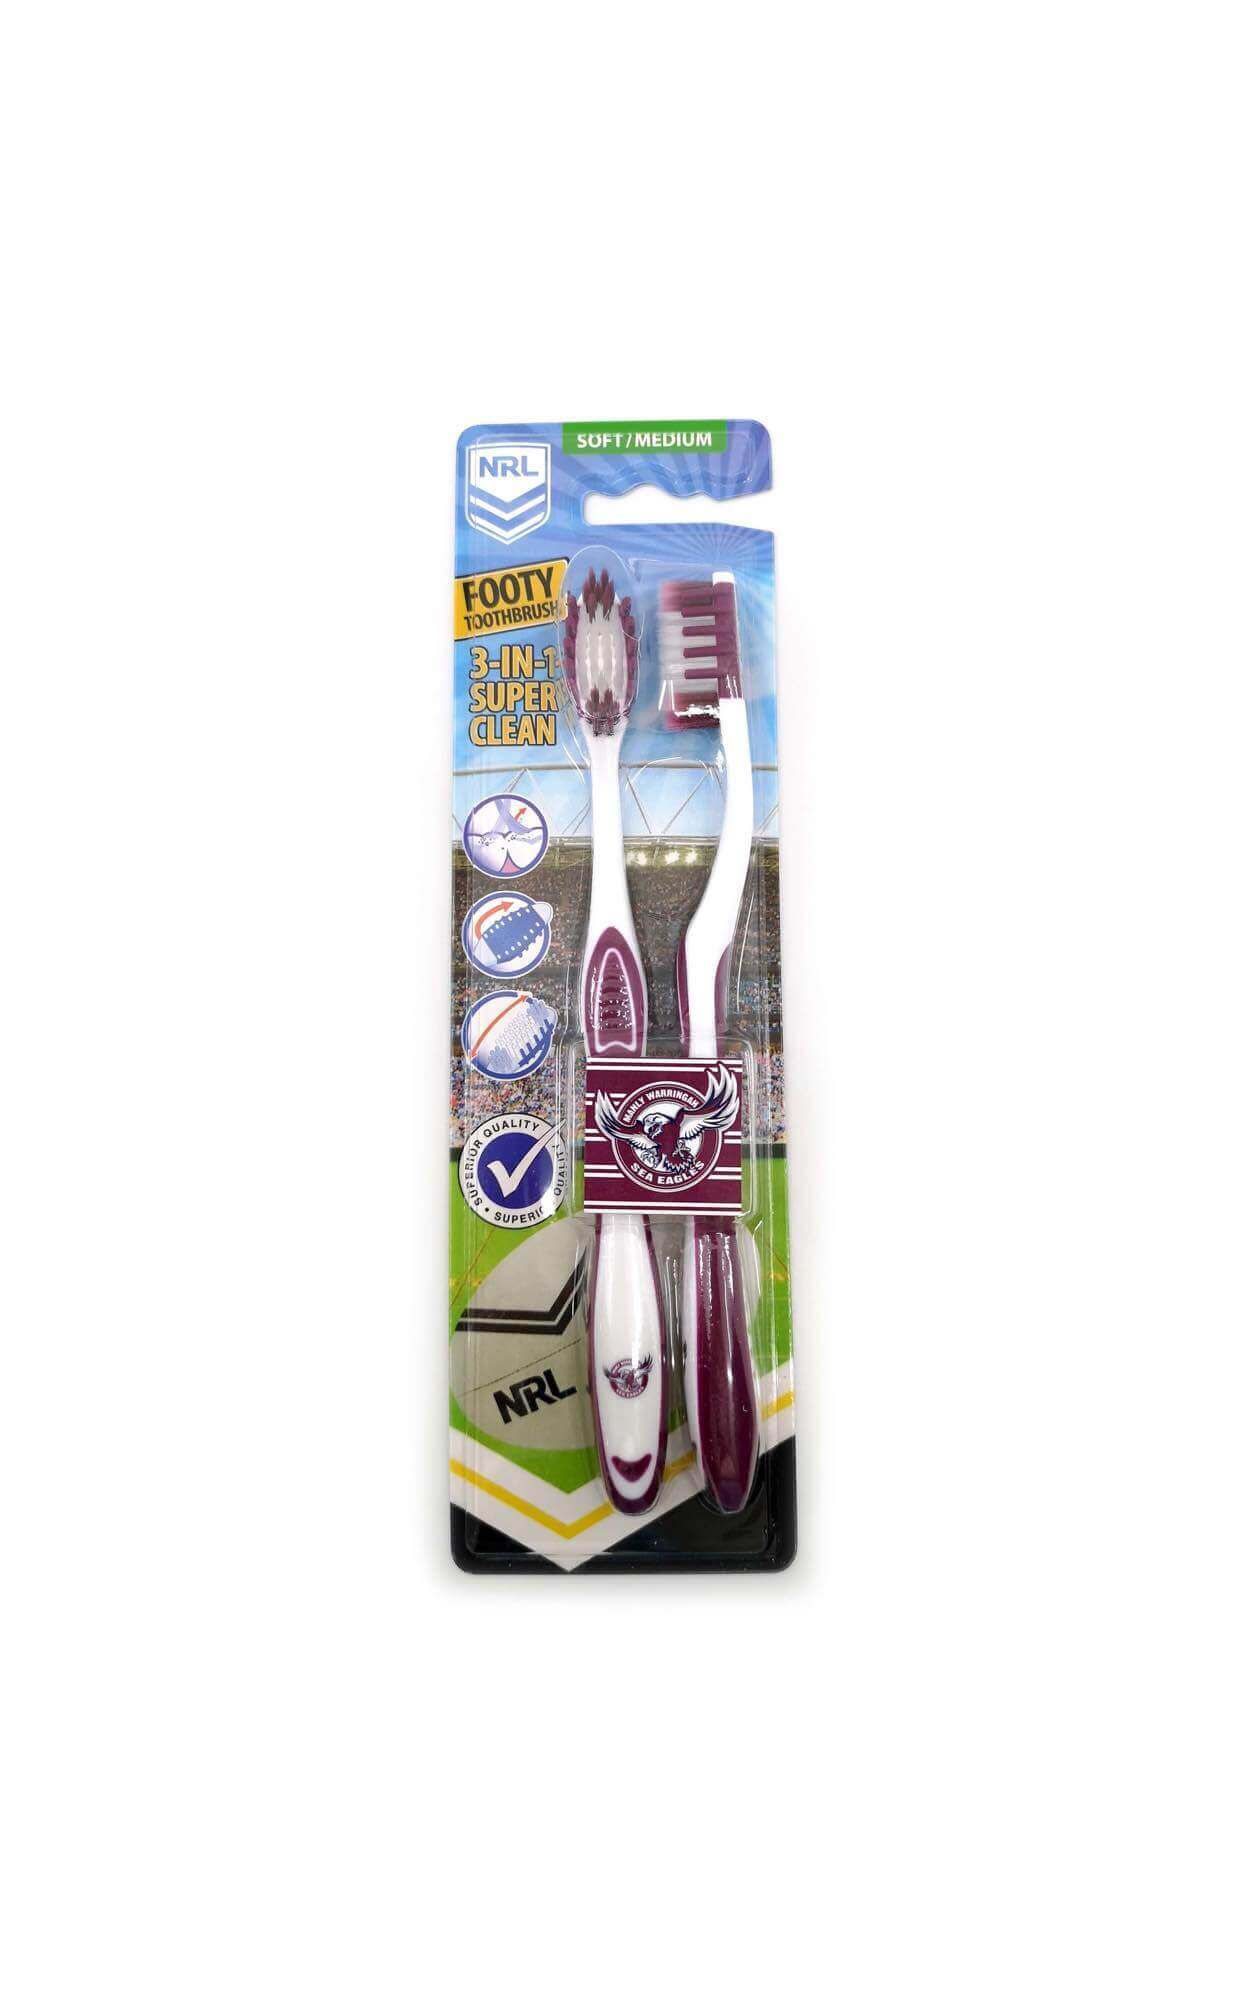 MANLY SEA EAGLES NRL TOOTHBRUSH 2 PACK_MANLY SEA EAGLES_STUBBY CLUB